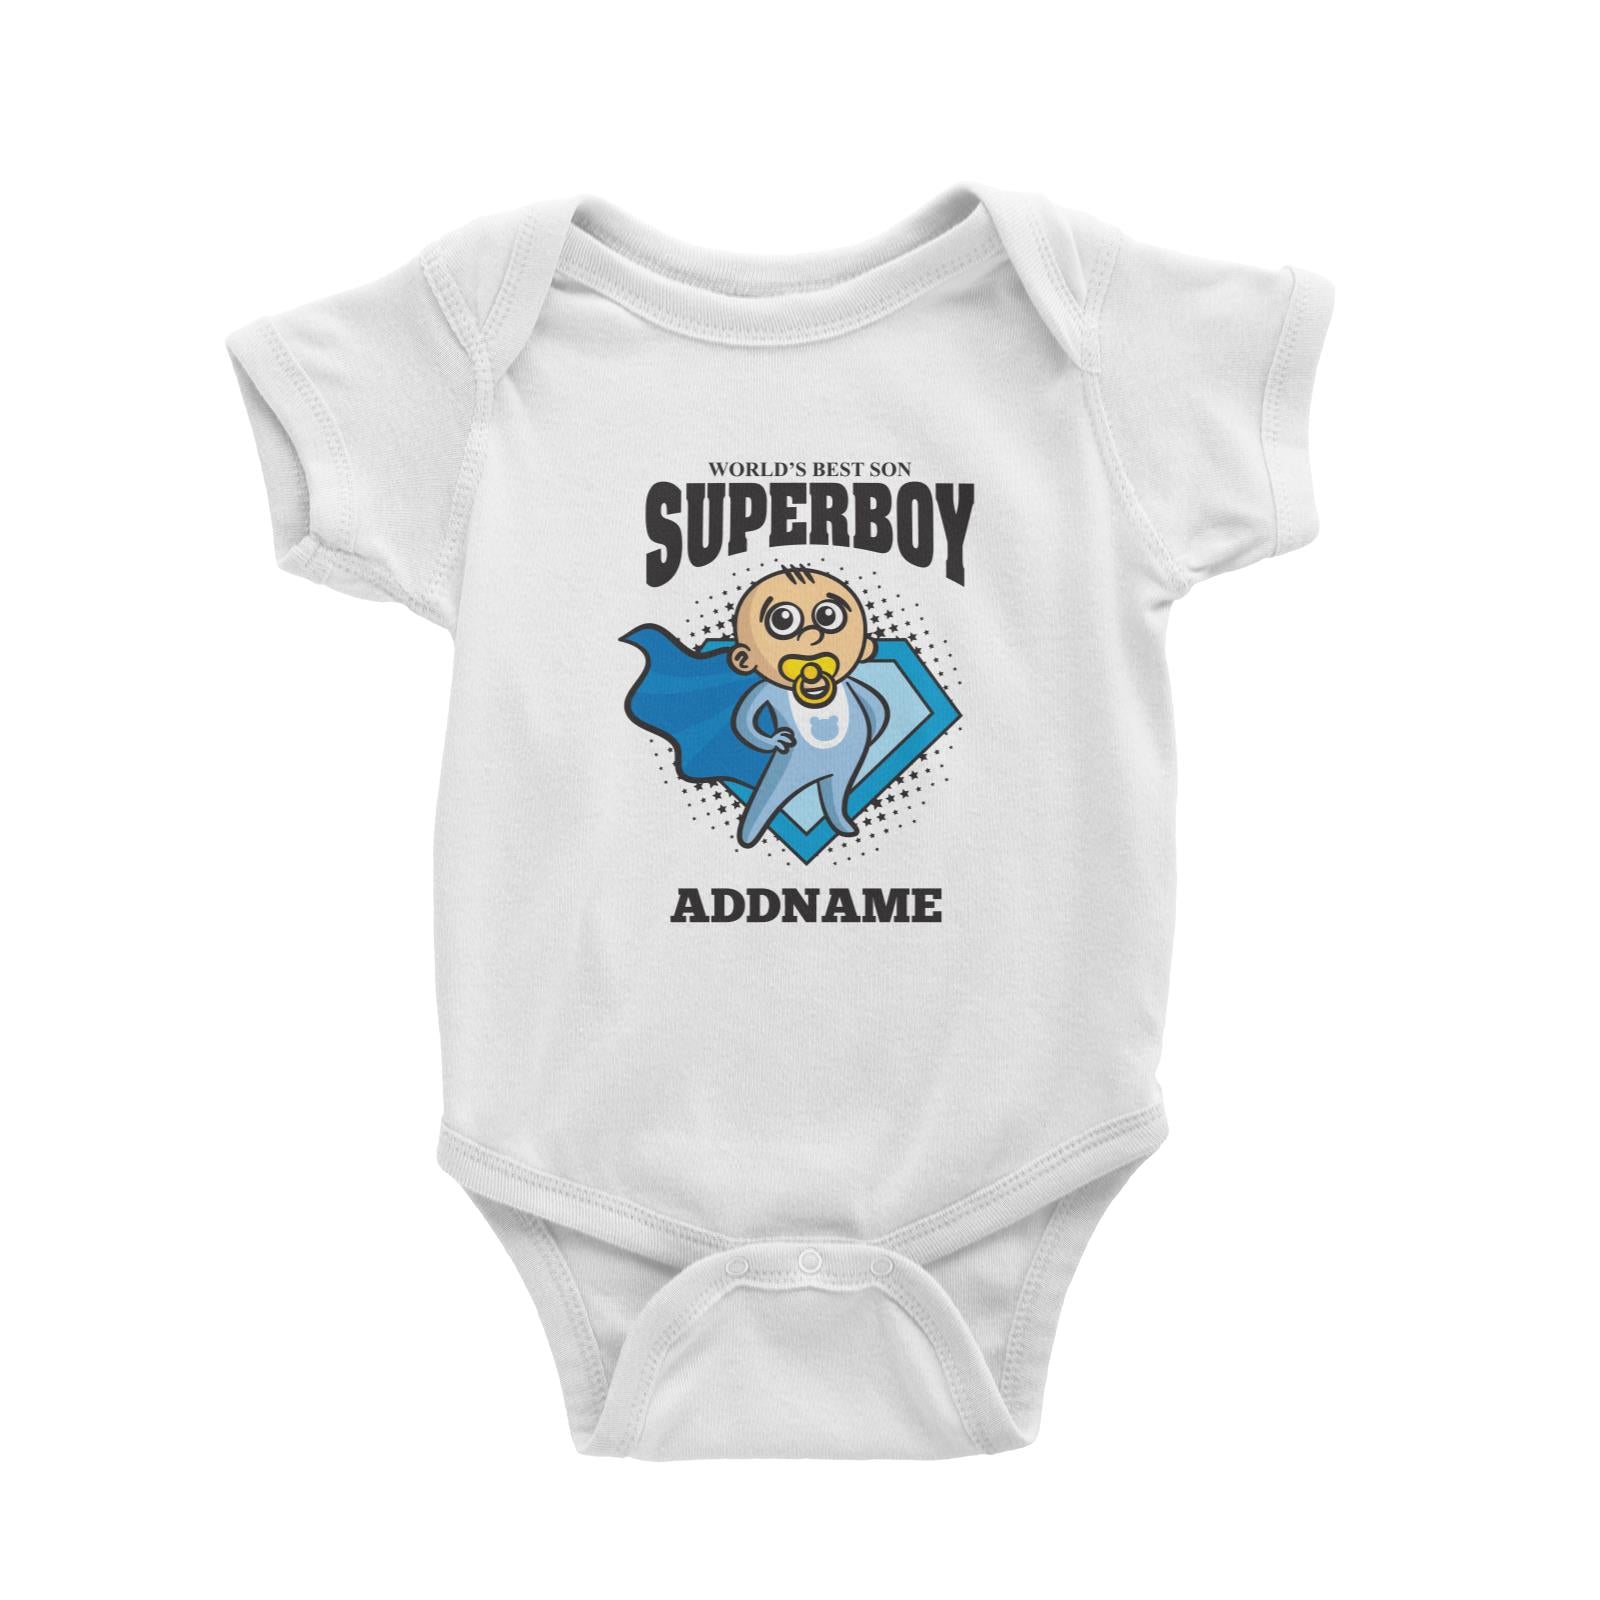 Best Son Superboy Baby (FLASH DEAL) Baby Romper Personalizable Designs Matching Family Superhero Family Edition Superhero